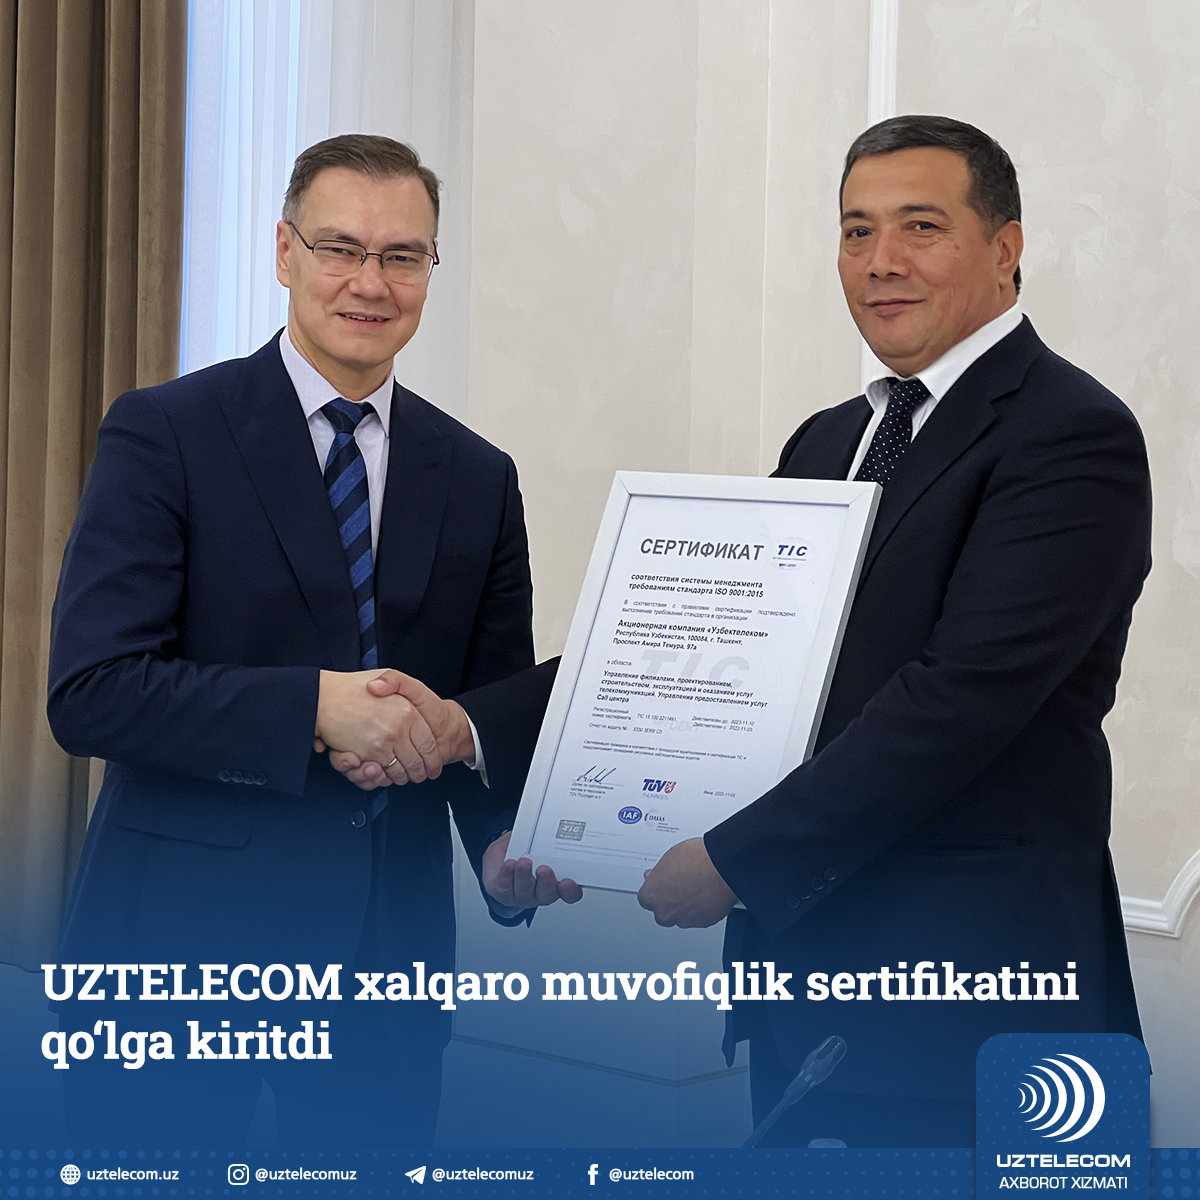 UZTELECOM received an international certificate of conformity of the management system